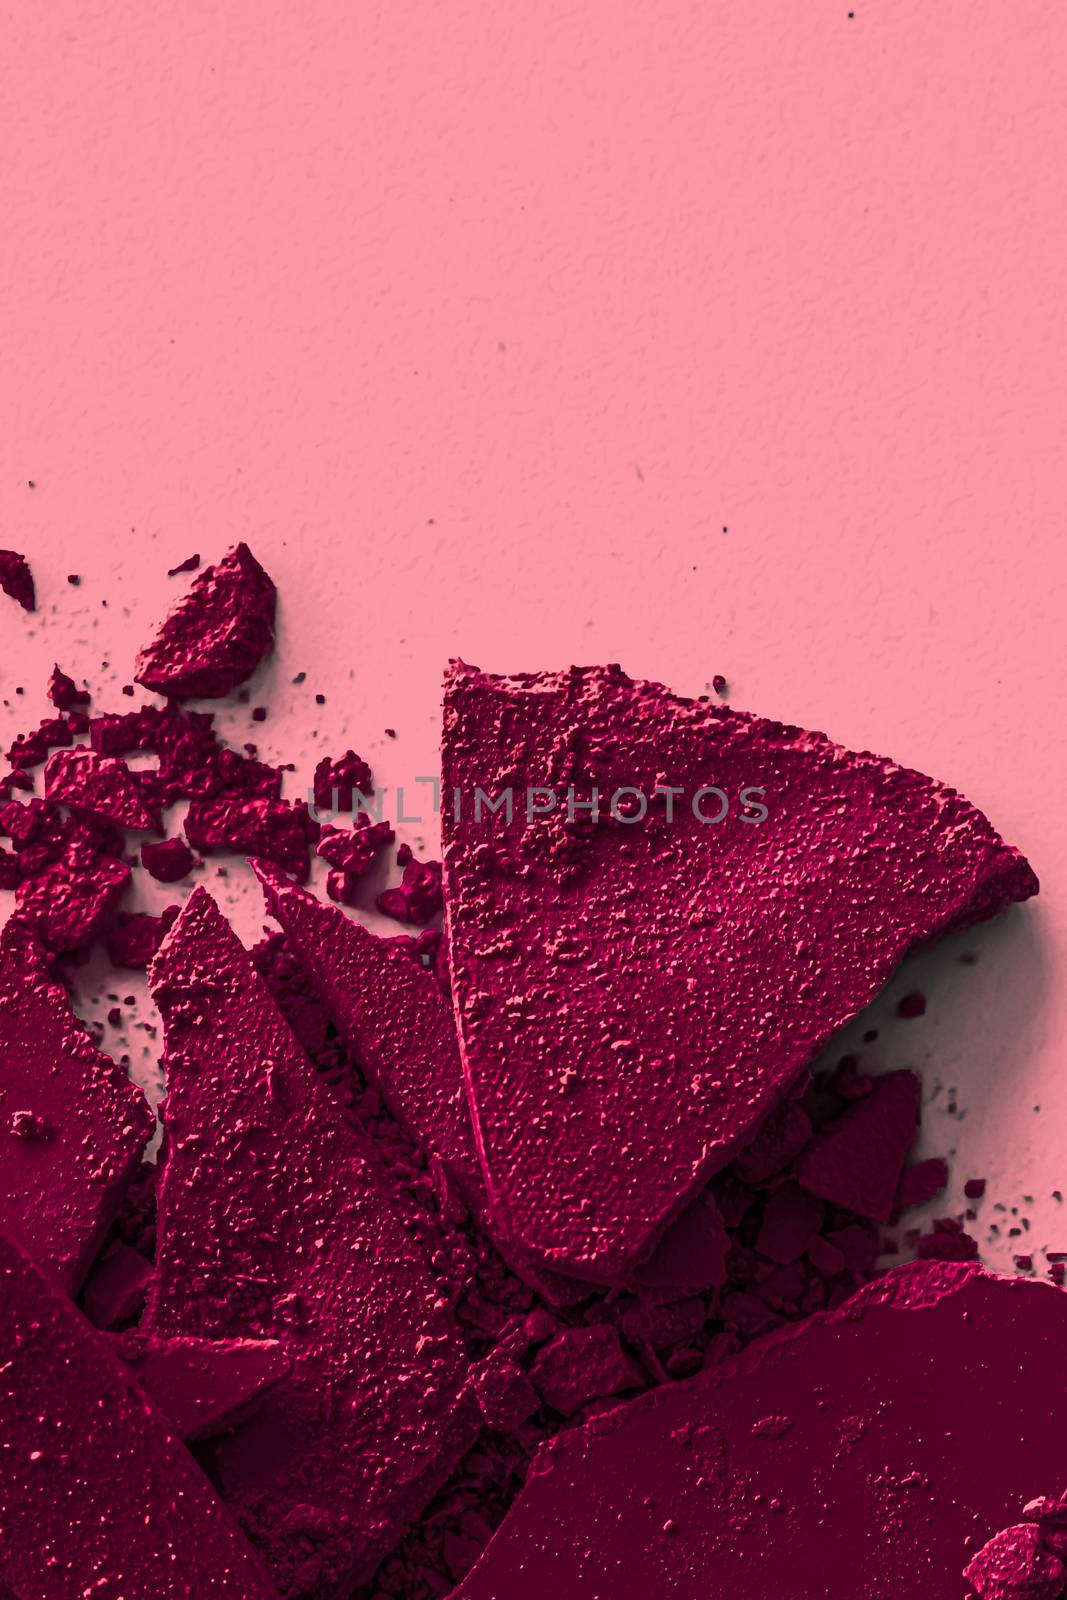 Burgundy eye shadow powder as makeup palette closeup, crushed cosmetics and beauty textures